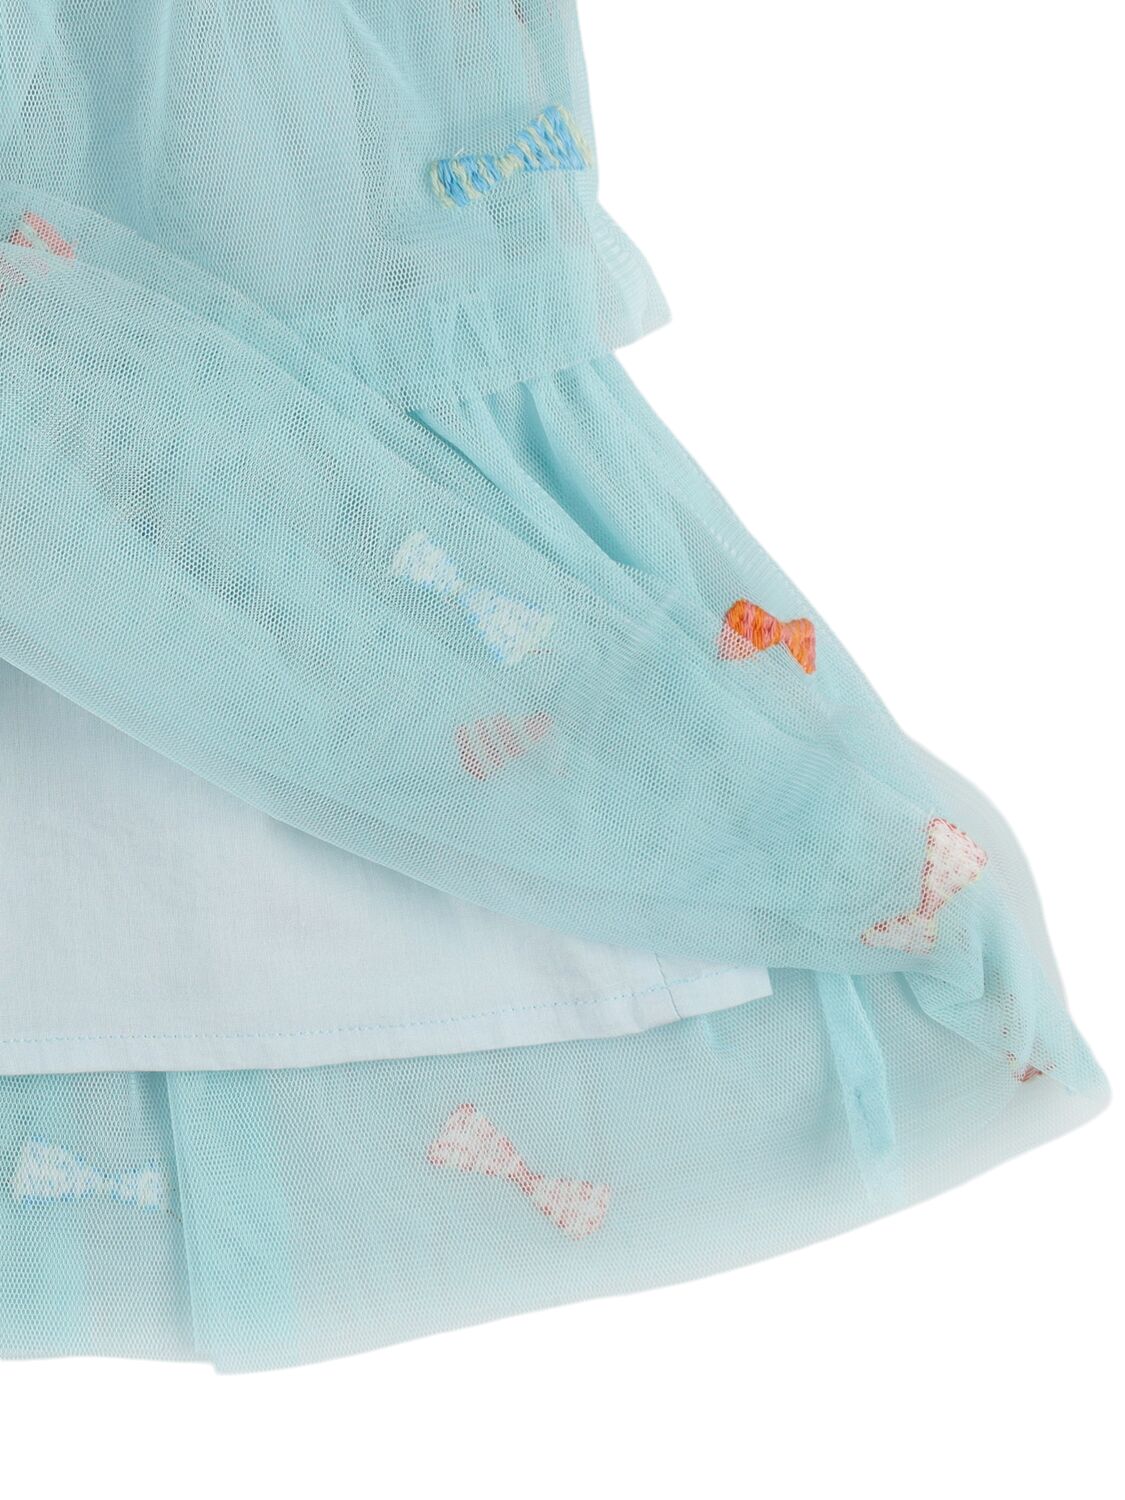 Shop Stella Mccartney Embroidered Tech Dress W/bows In Light Blue